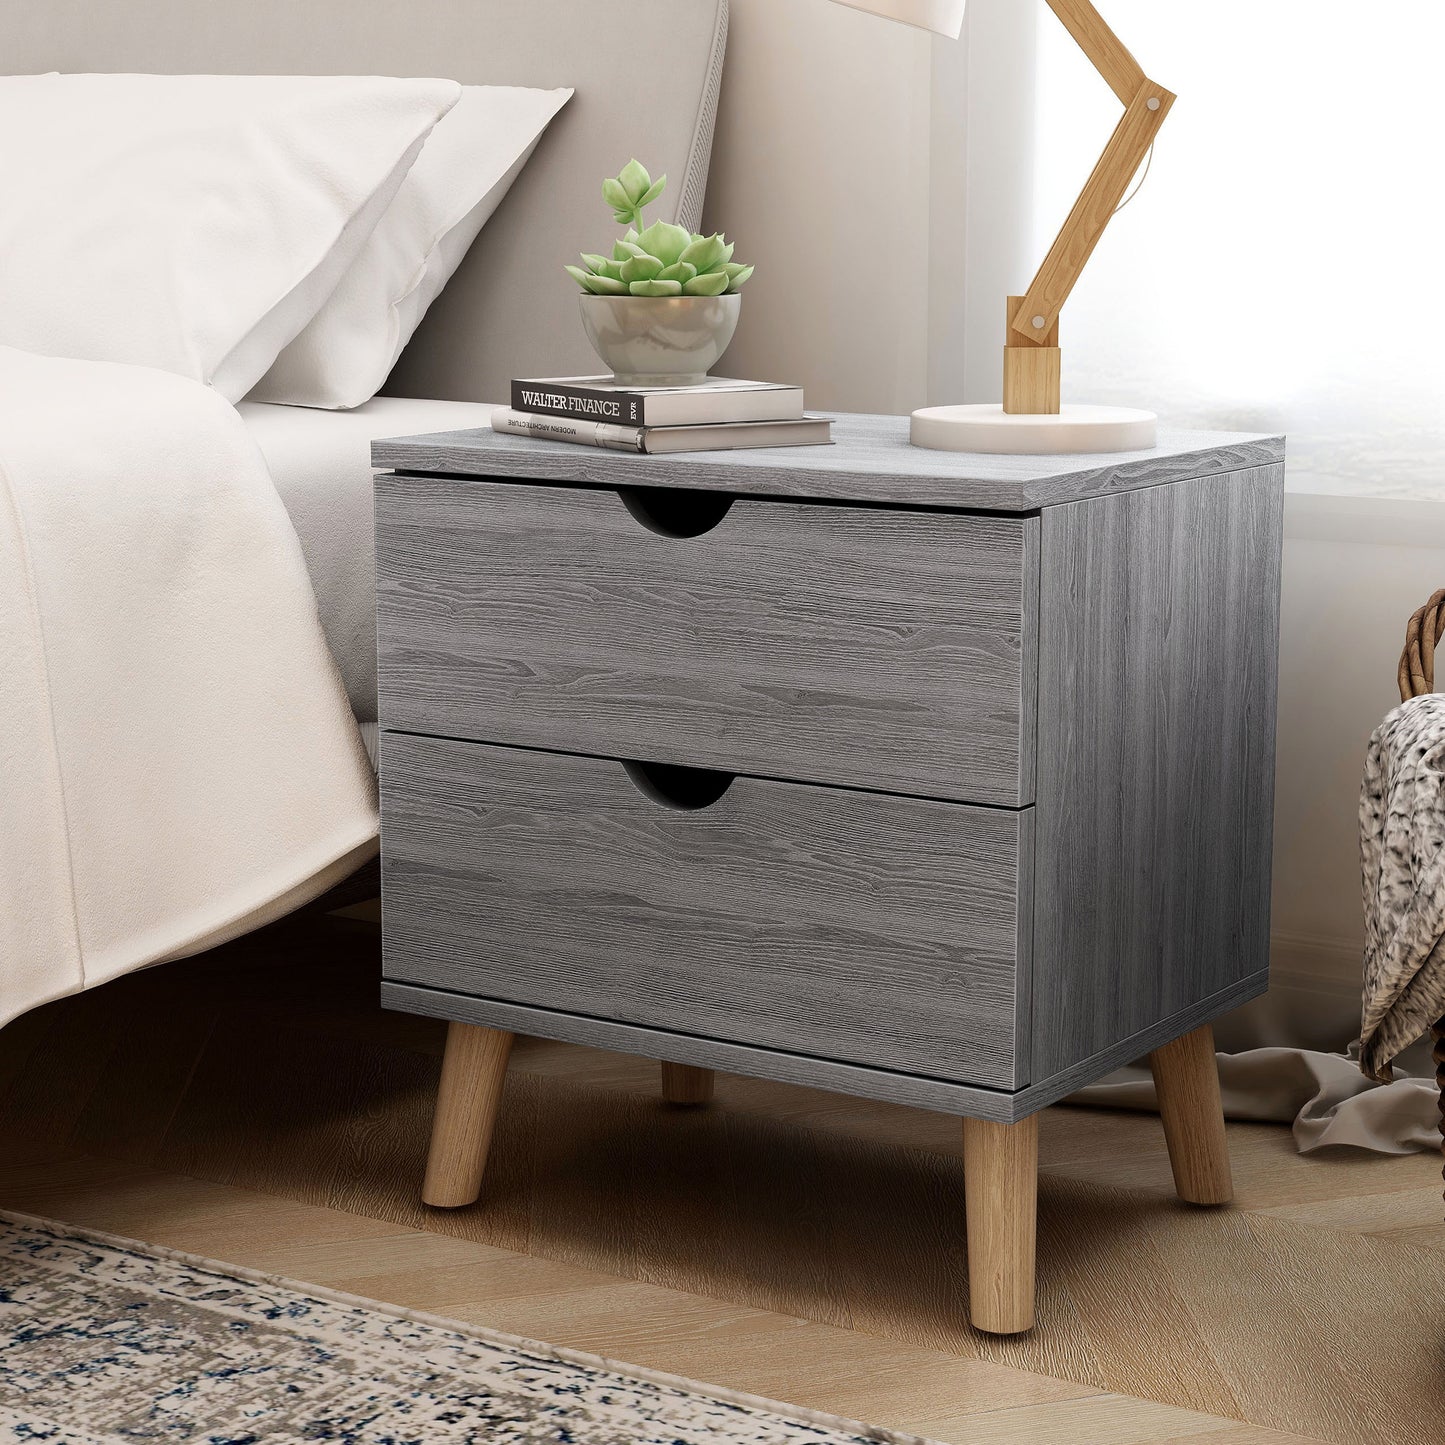 Left angled mid-century modern distressed gray two-drawer nightstand in a bedroom with accessories